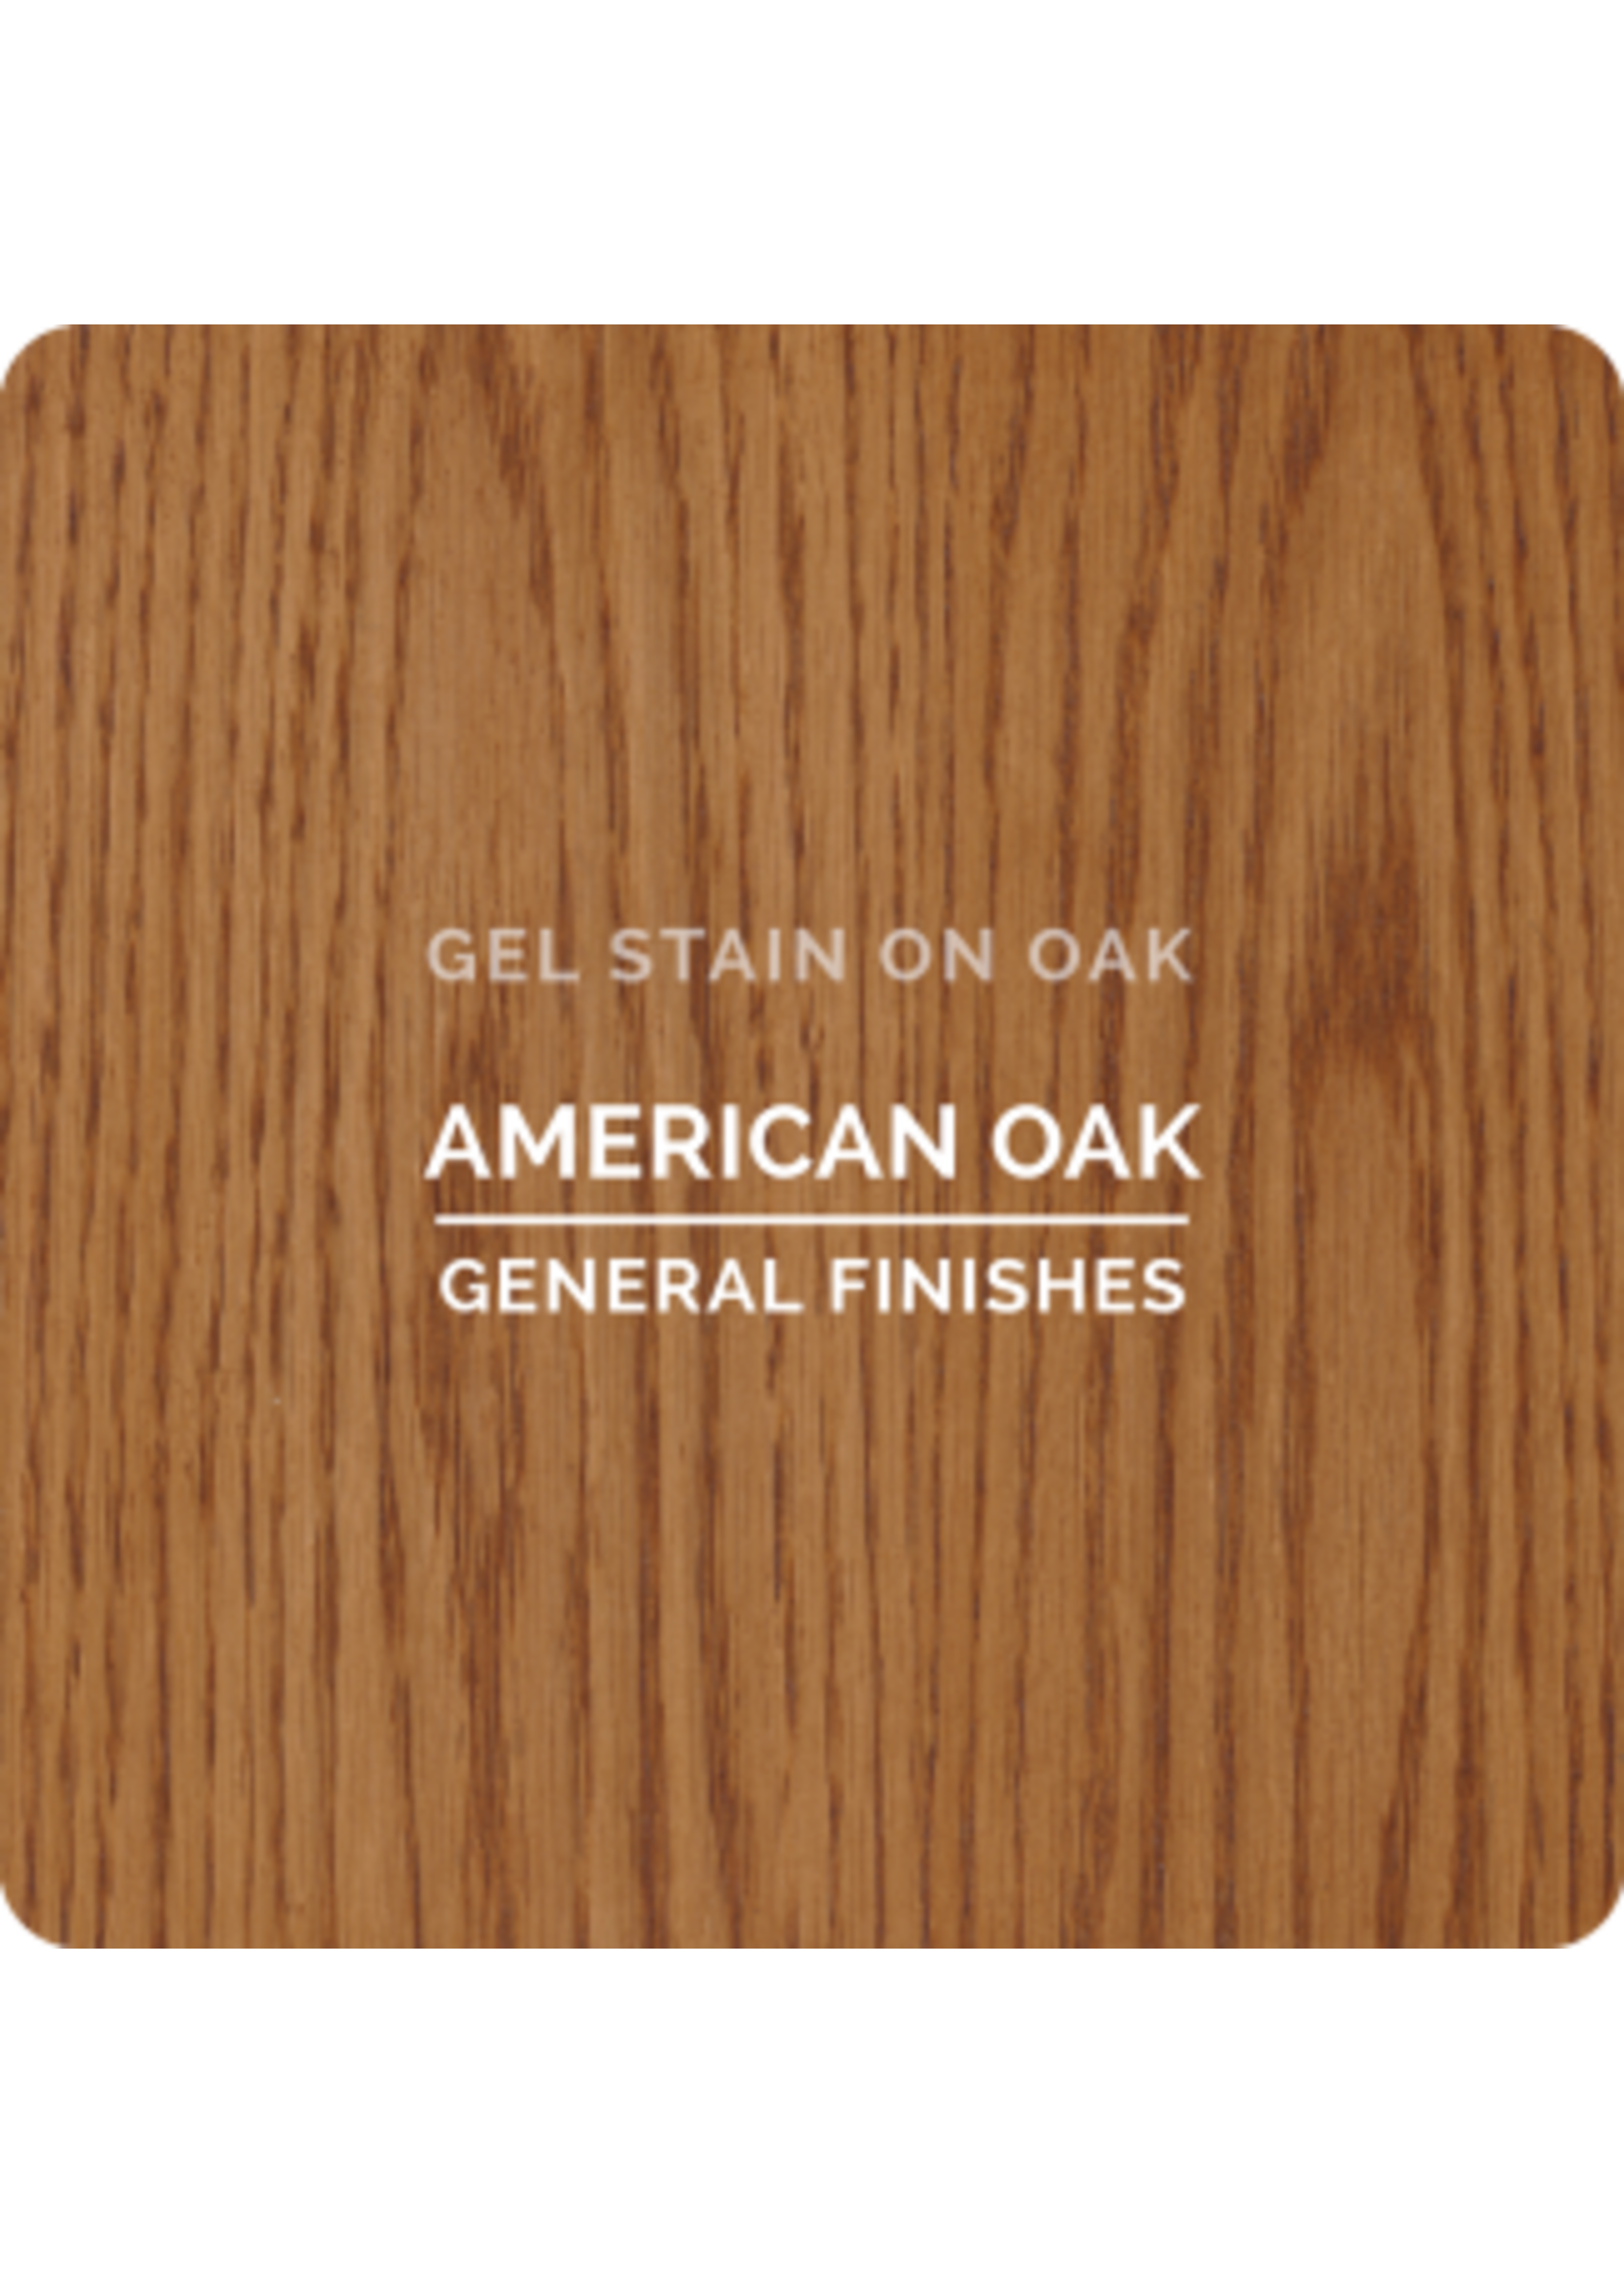 General Finishes American Oak General Finishes Gel Stain